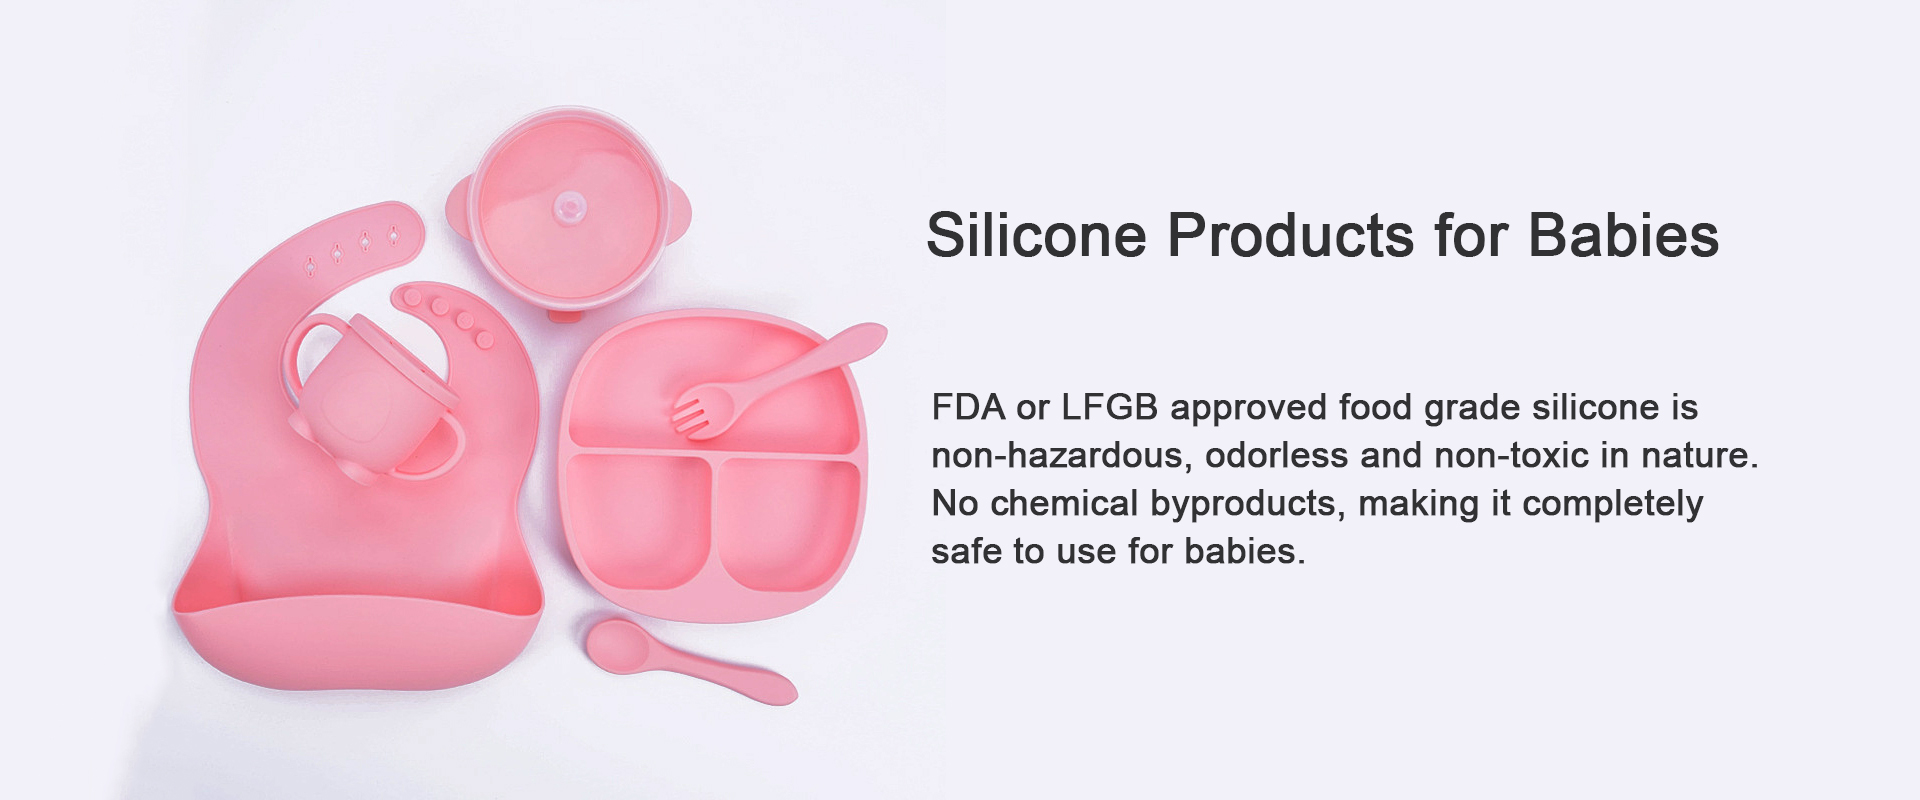 Silicone Products for Babies